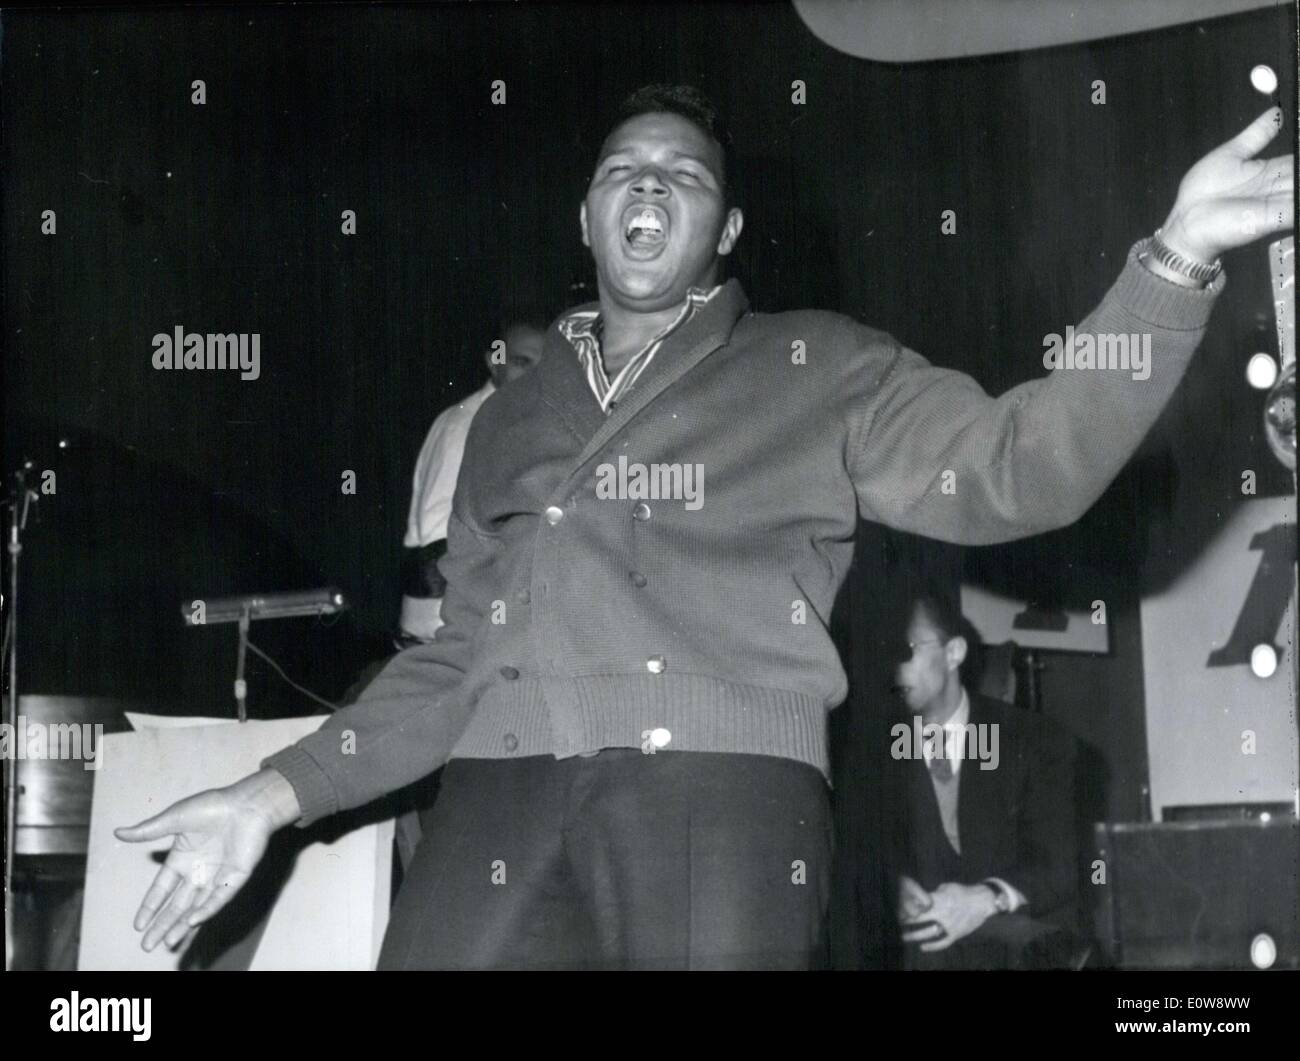 Dec. 12, 1961 - The American singer was booed off stage while people in the audience threw wads of paper at him. Many people asked for their tickets to be reimbursed. Stock Photo